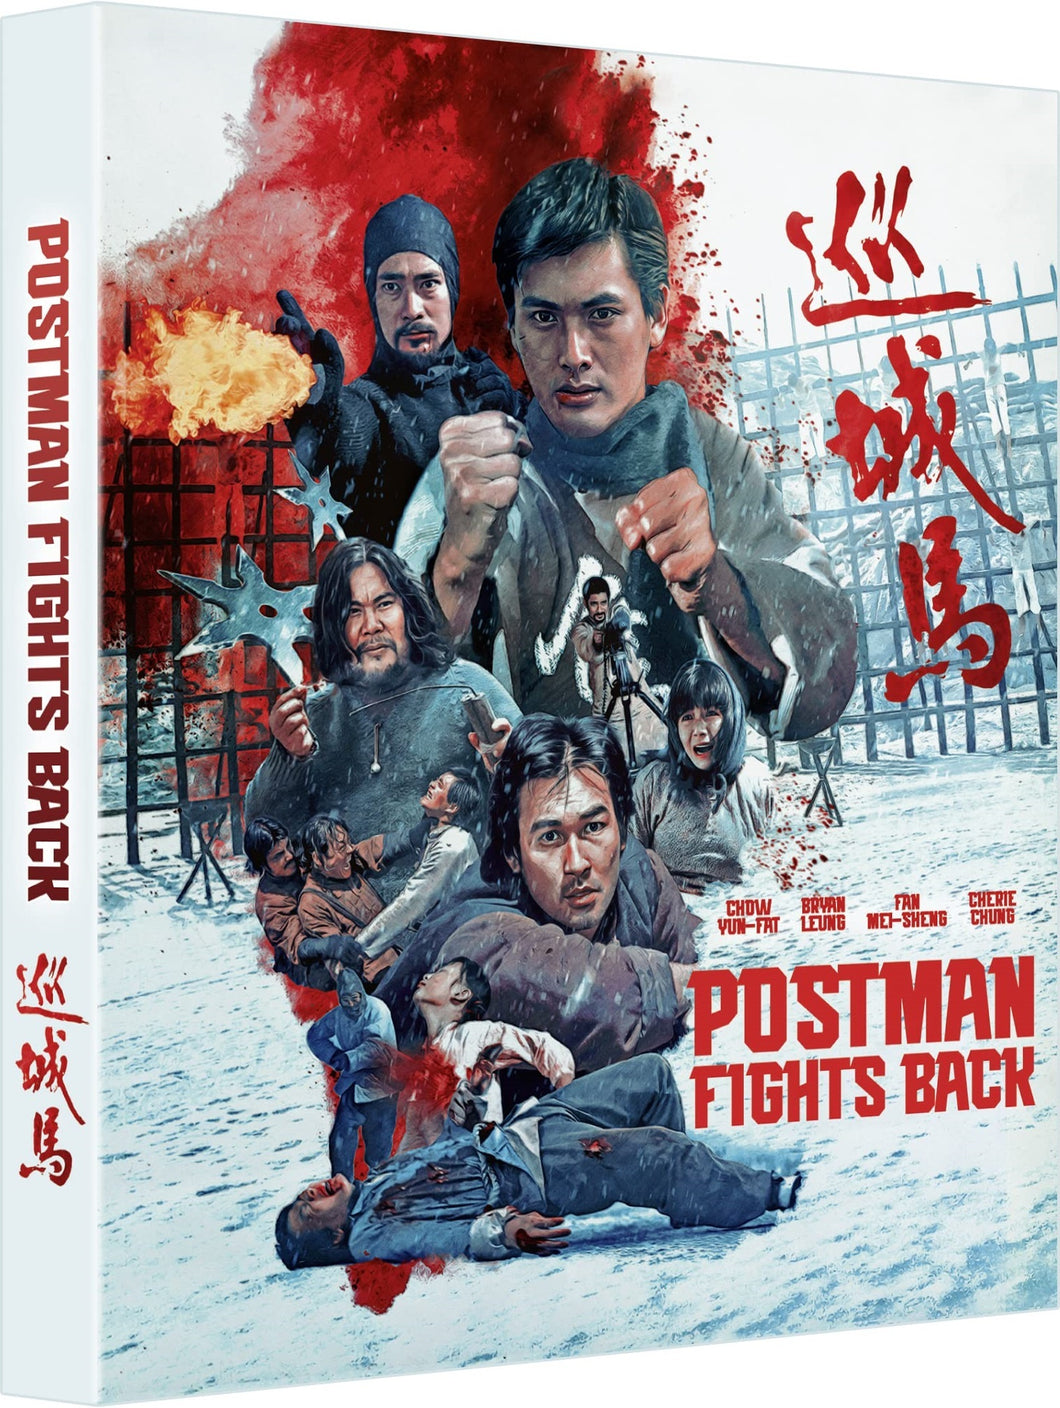 The Postman Fights Back (1982) - front cover